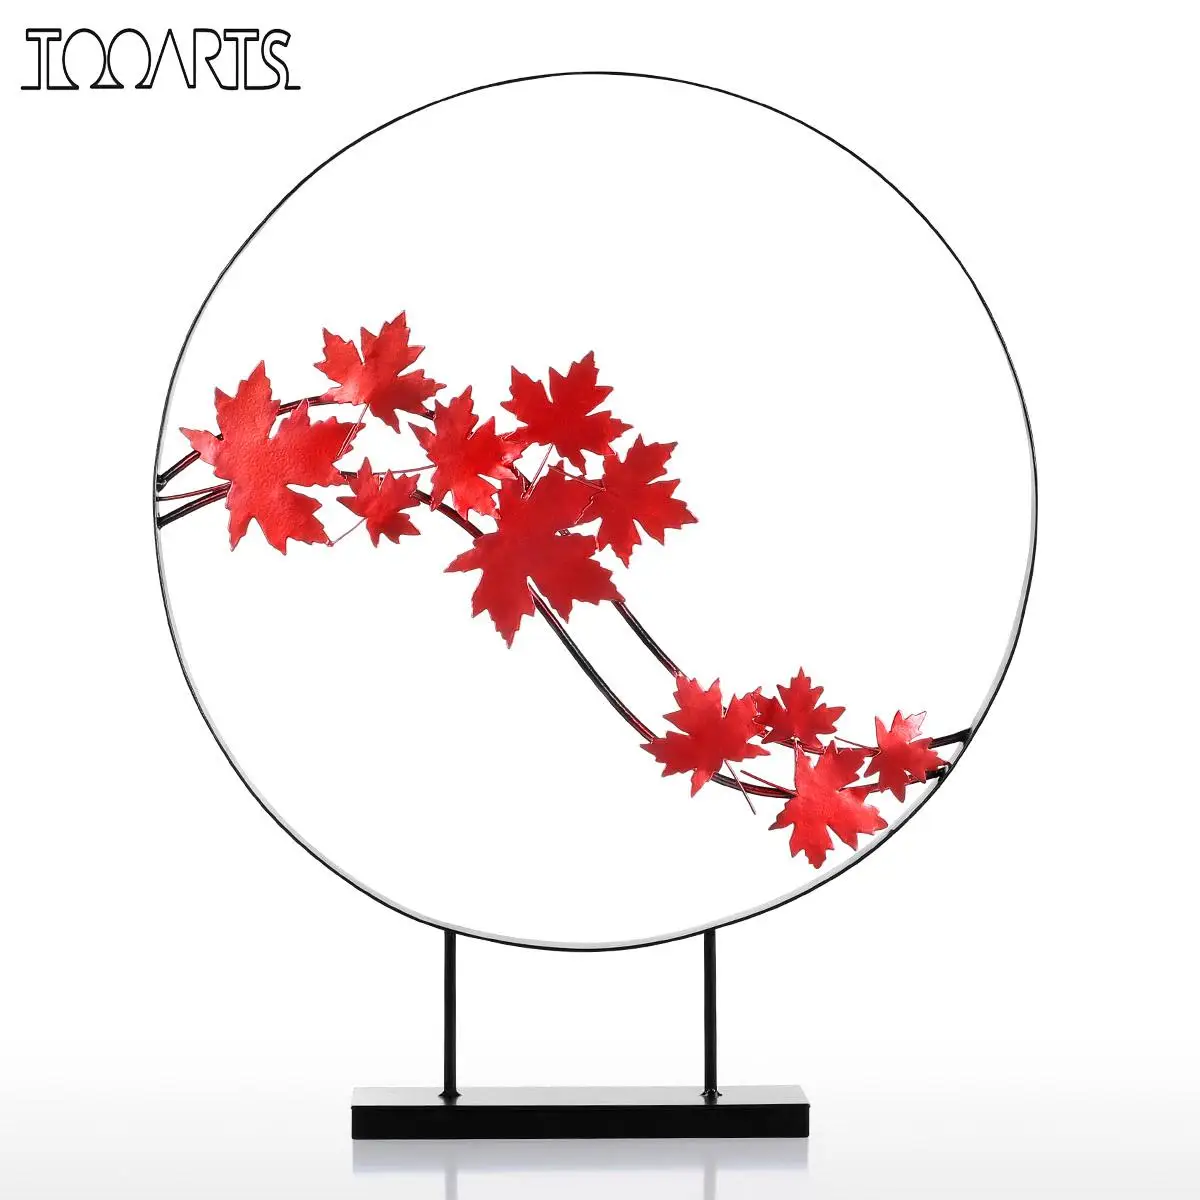 

Tooarts Tomfeel Maple Leaf Ornament Iron Sculpture Abstract Modern Sculpture Iron Circle Home Decor Modern Concise Artwork